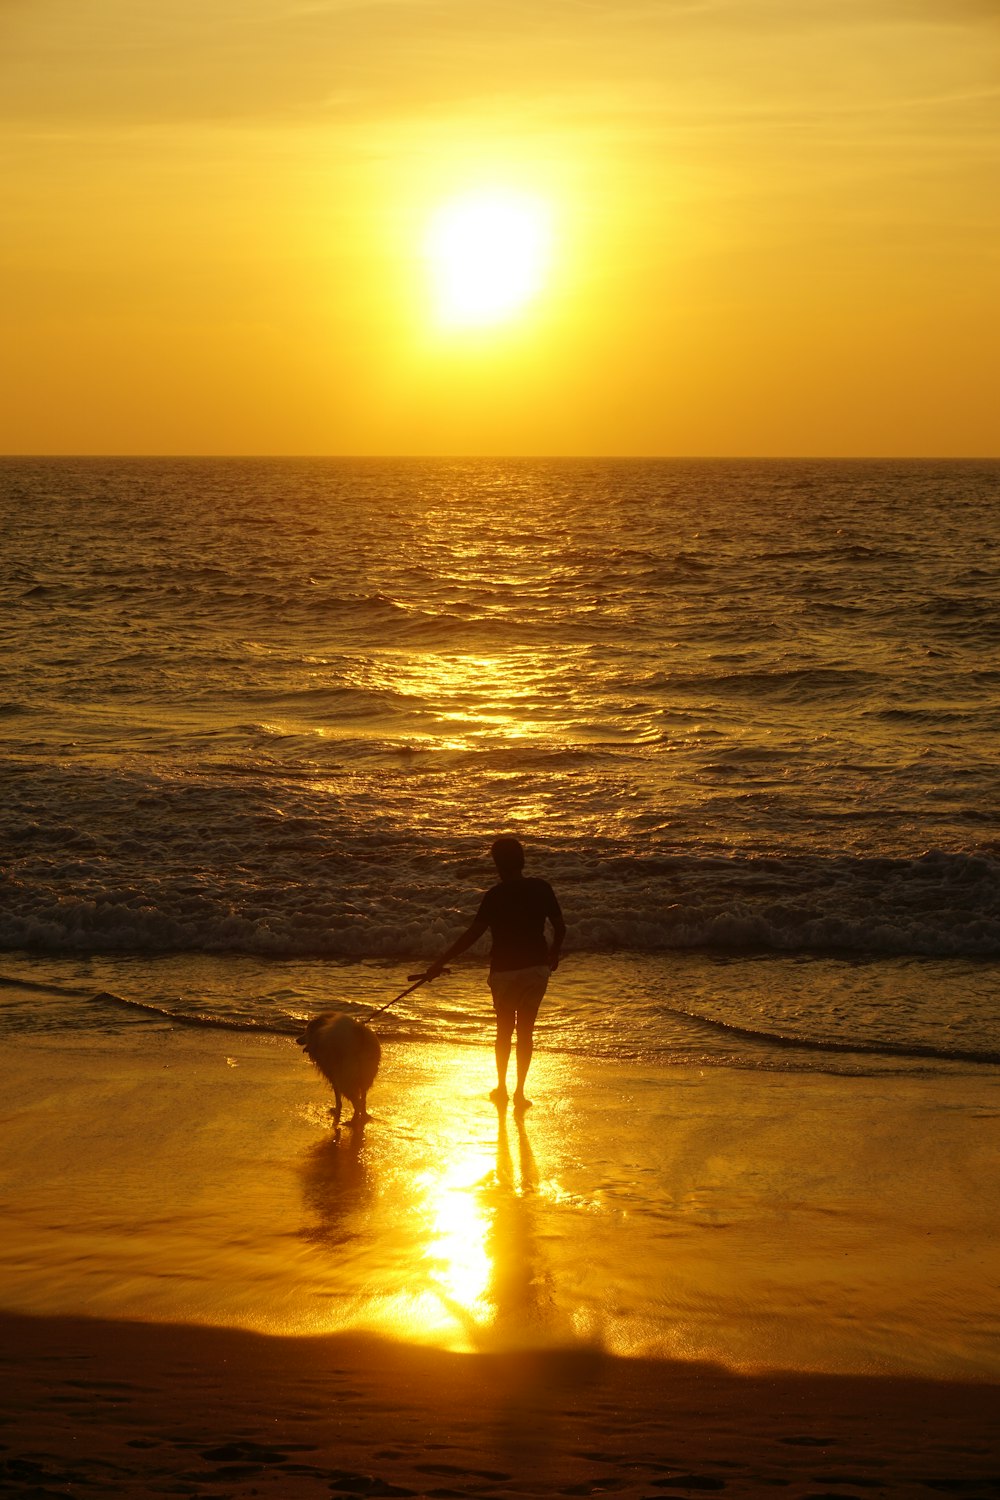 a person and a dog on a beach at sunset